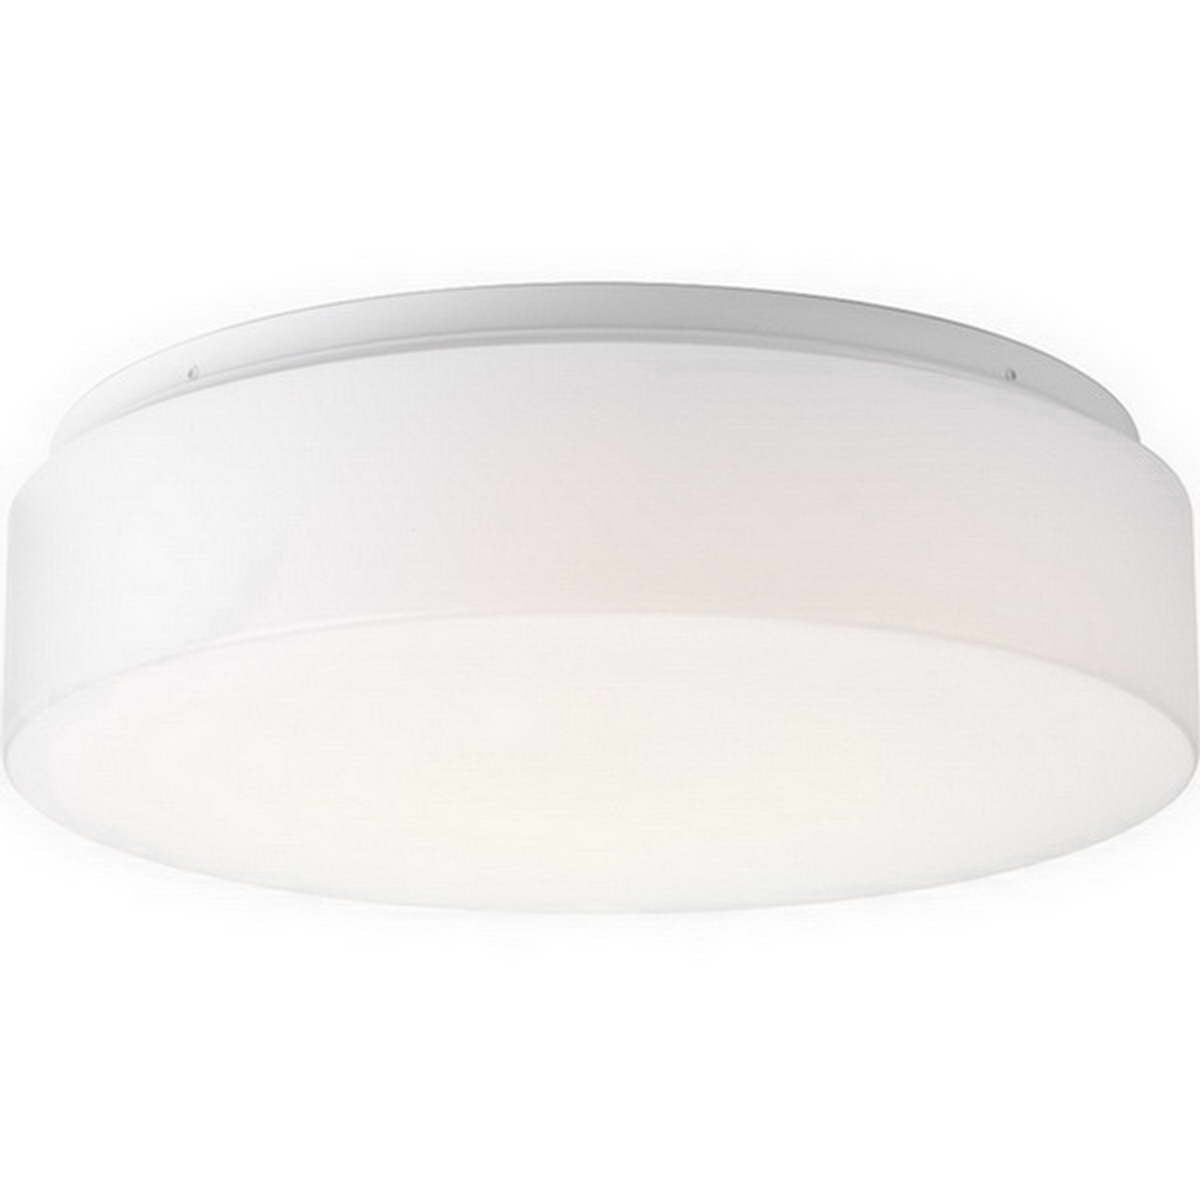 Drums and Clouds 14 in LED Flush Mount Light White finish